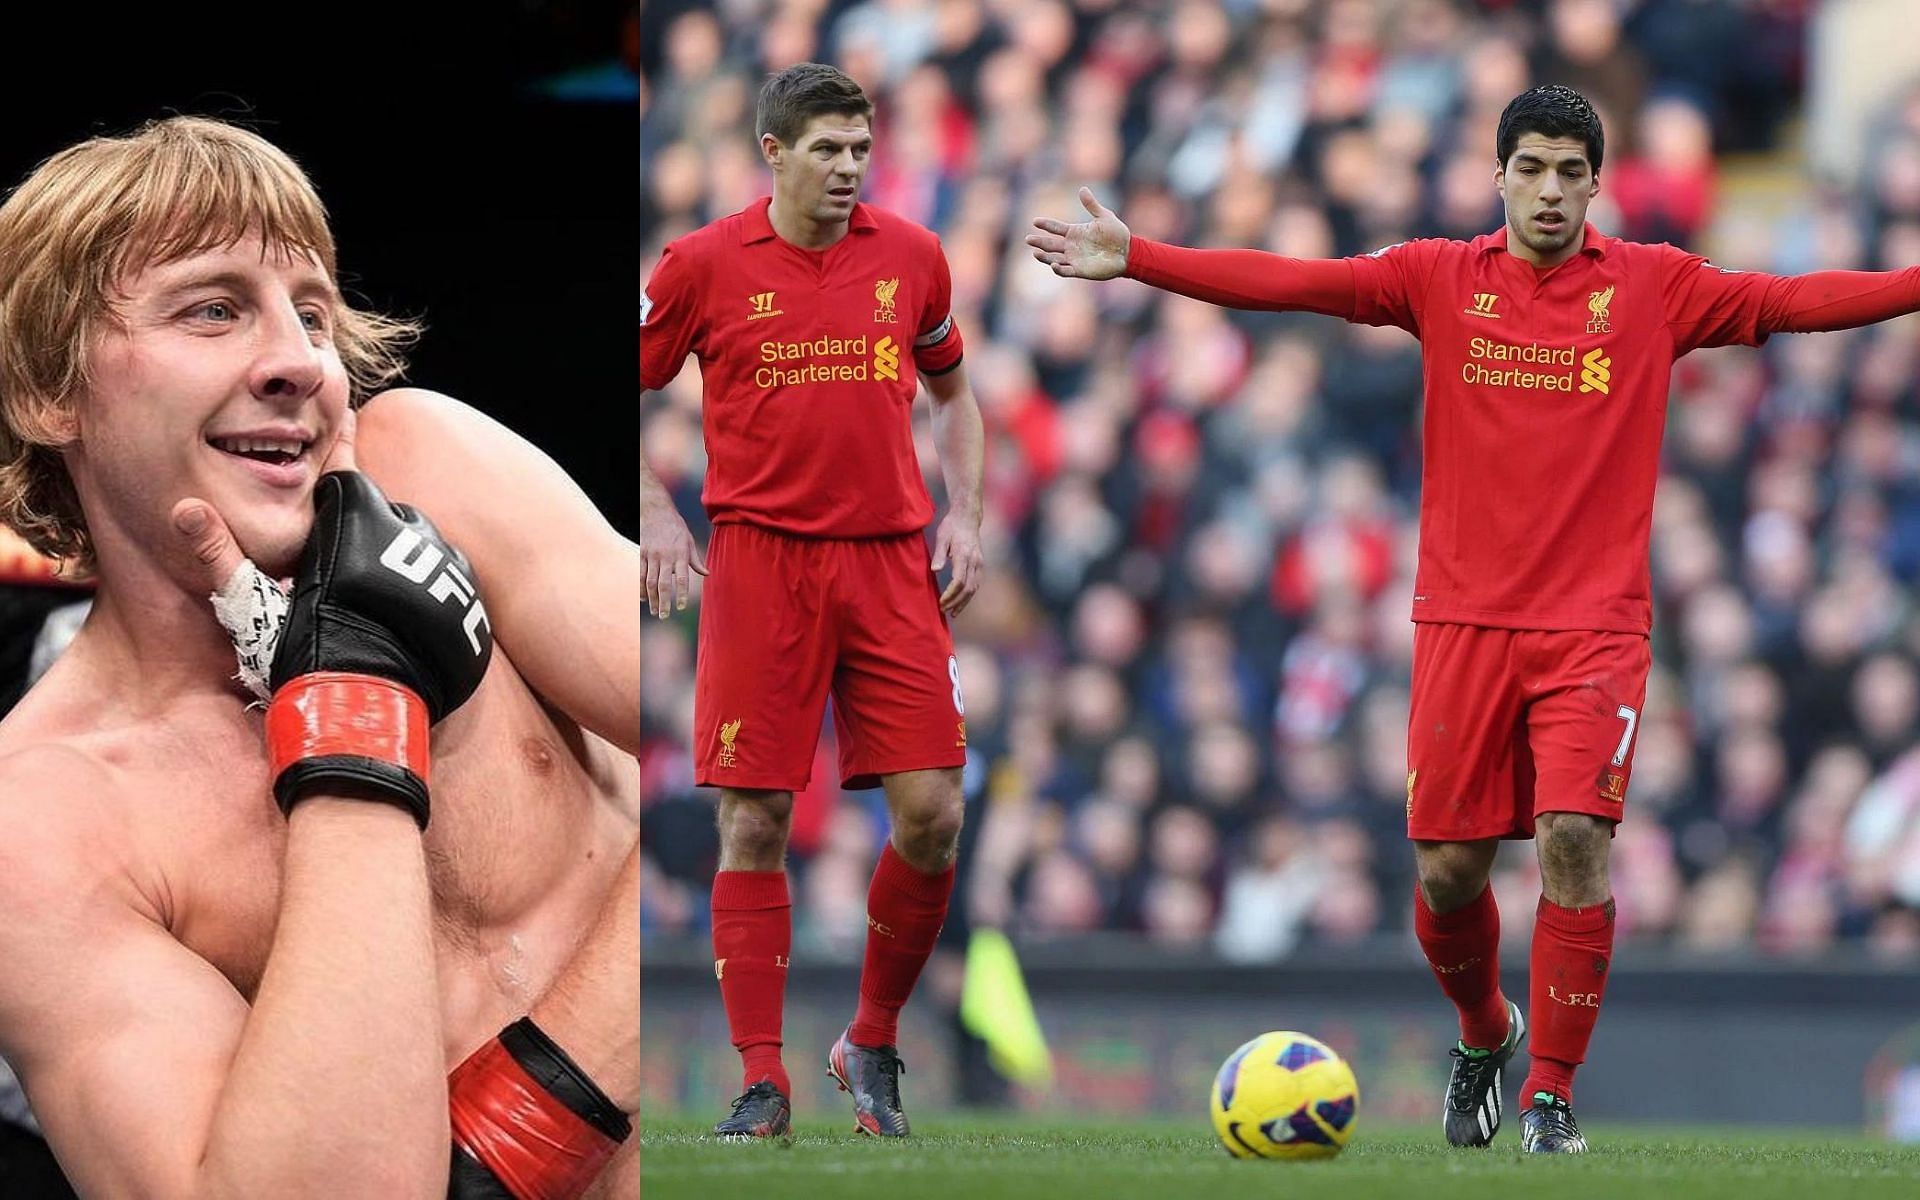 Paddy Pimblett (left), Steven Gerrard and Luis Suarez (right) [Images courtesy of Getty]